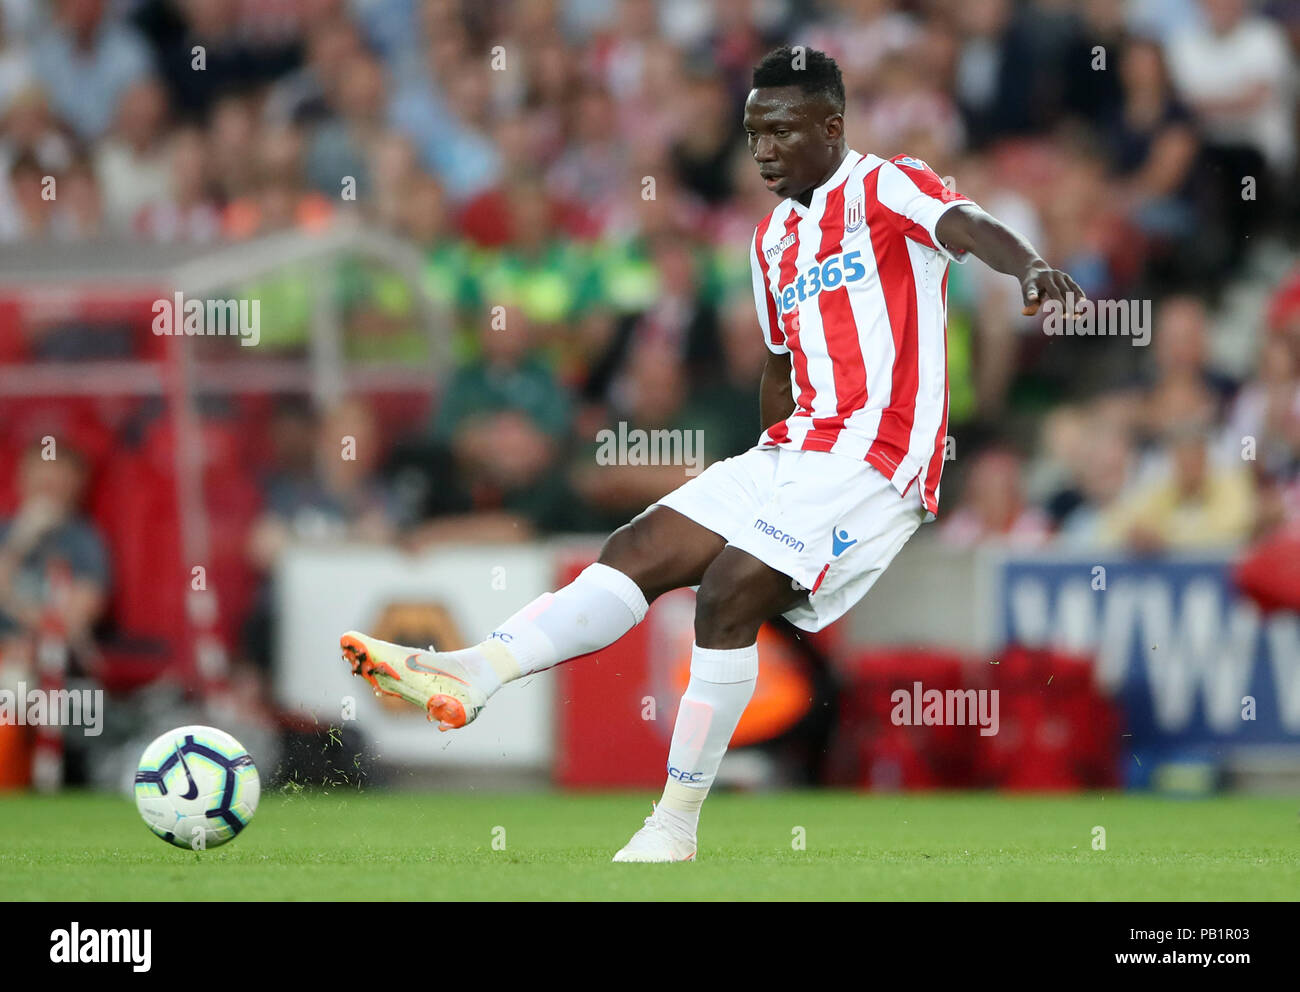 Stoke City's Oghenekaro Etebo during a pre season friendly match at The Bet365 Stadium, Stoke. PRESS ASSOCIATION Photo. Picture date: Wednesday July 25, 2018. Photo credit should read: Nick Potts/PA Wire. EDITORIAL USE ONLY No use with unauthorised audio, video, data, fixture lists, club/league logos or 'live' services. Online in-match use limited to 75 images, no video emulation. No use in betting, games or single club/league/player publications. Stock Photo